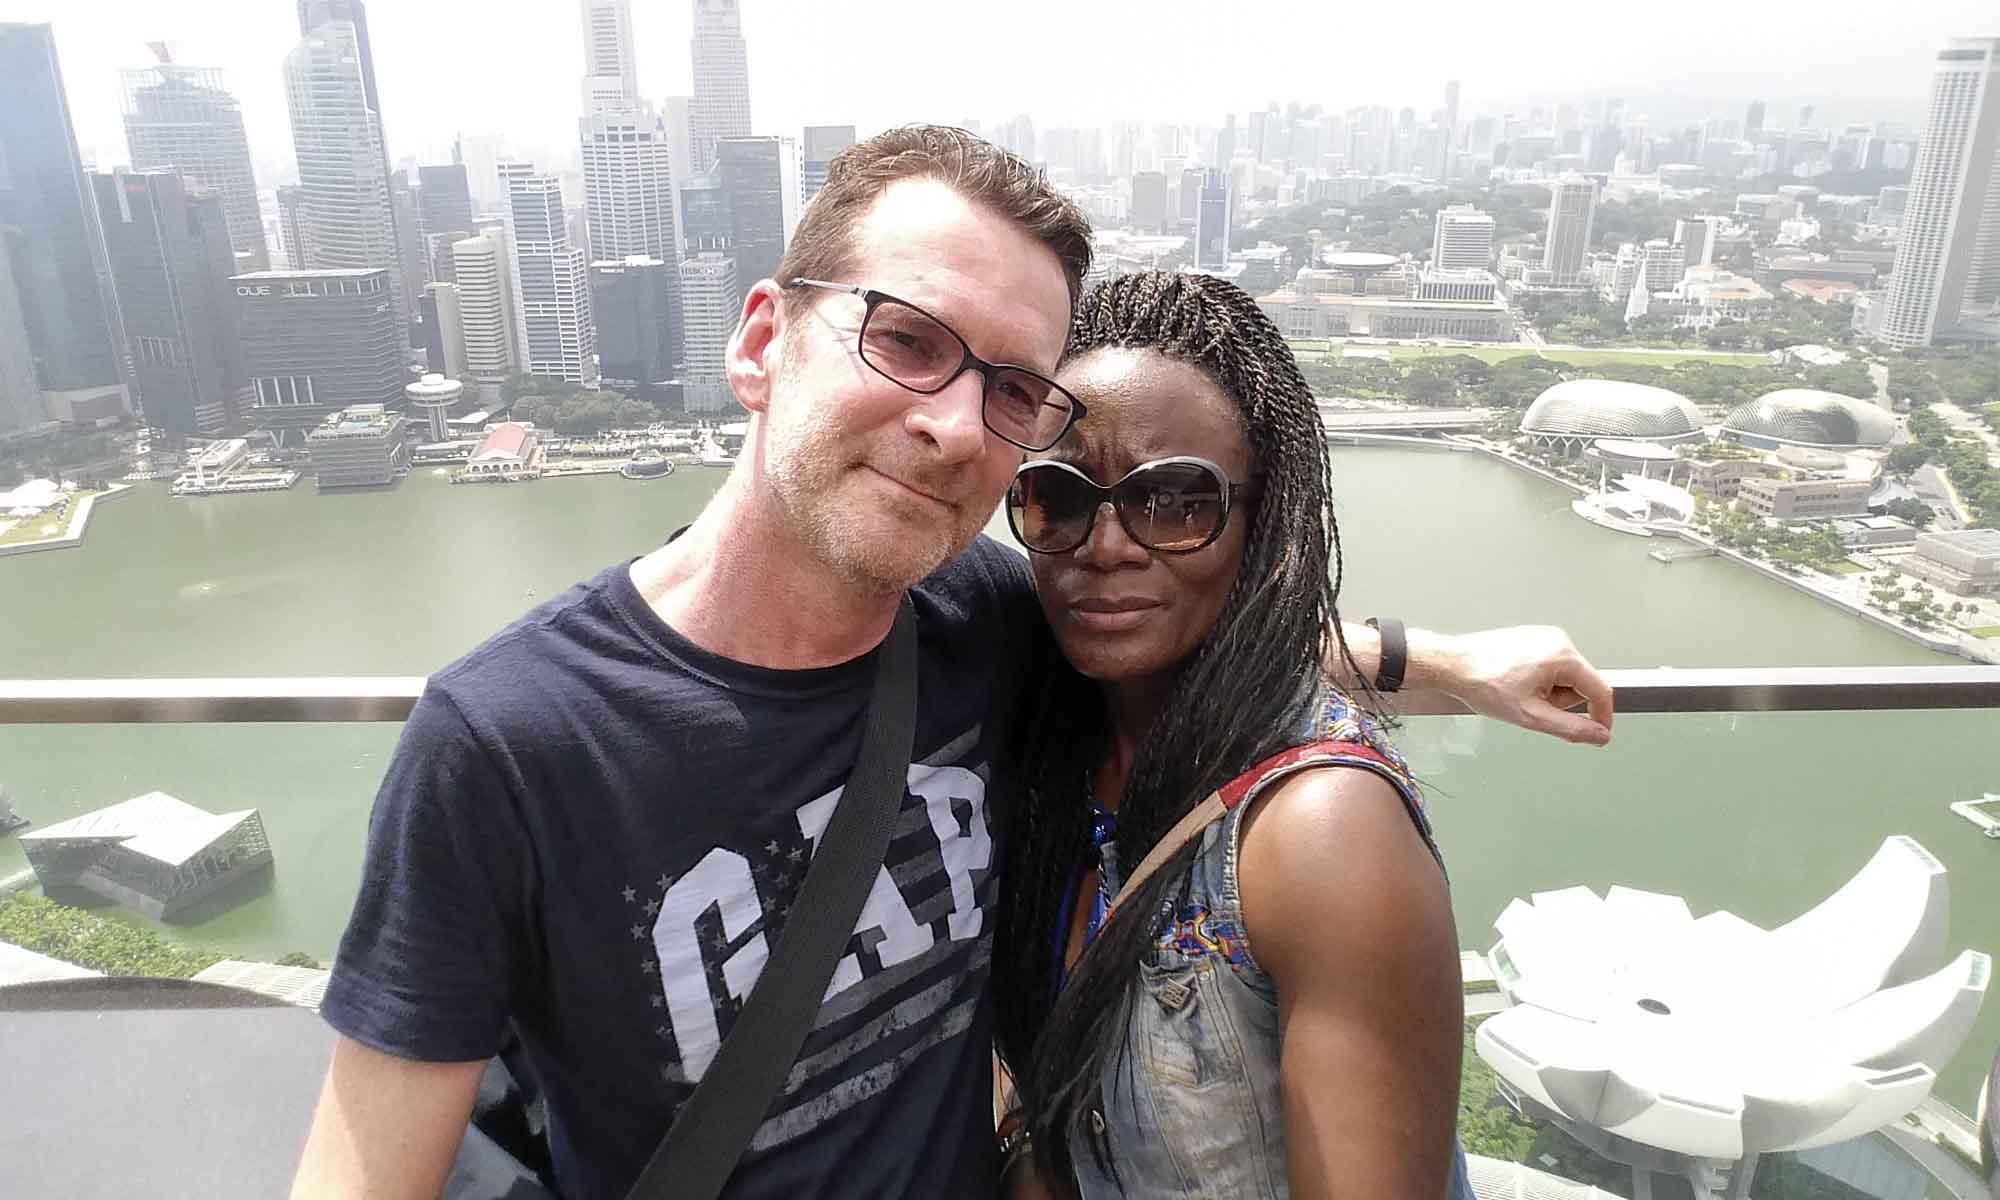 Us at the roof of the Marina Bay Sands Hotel, Singapore